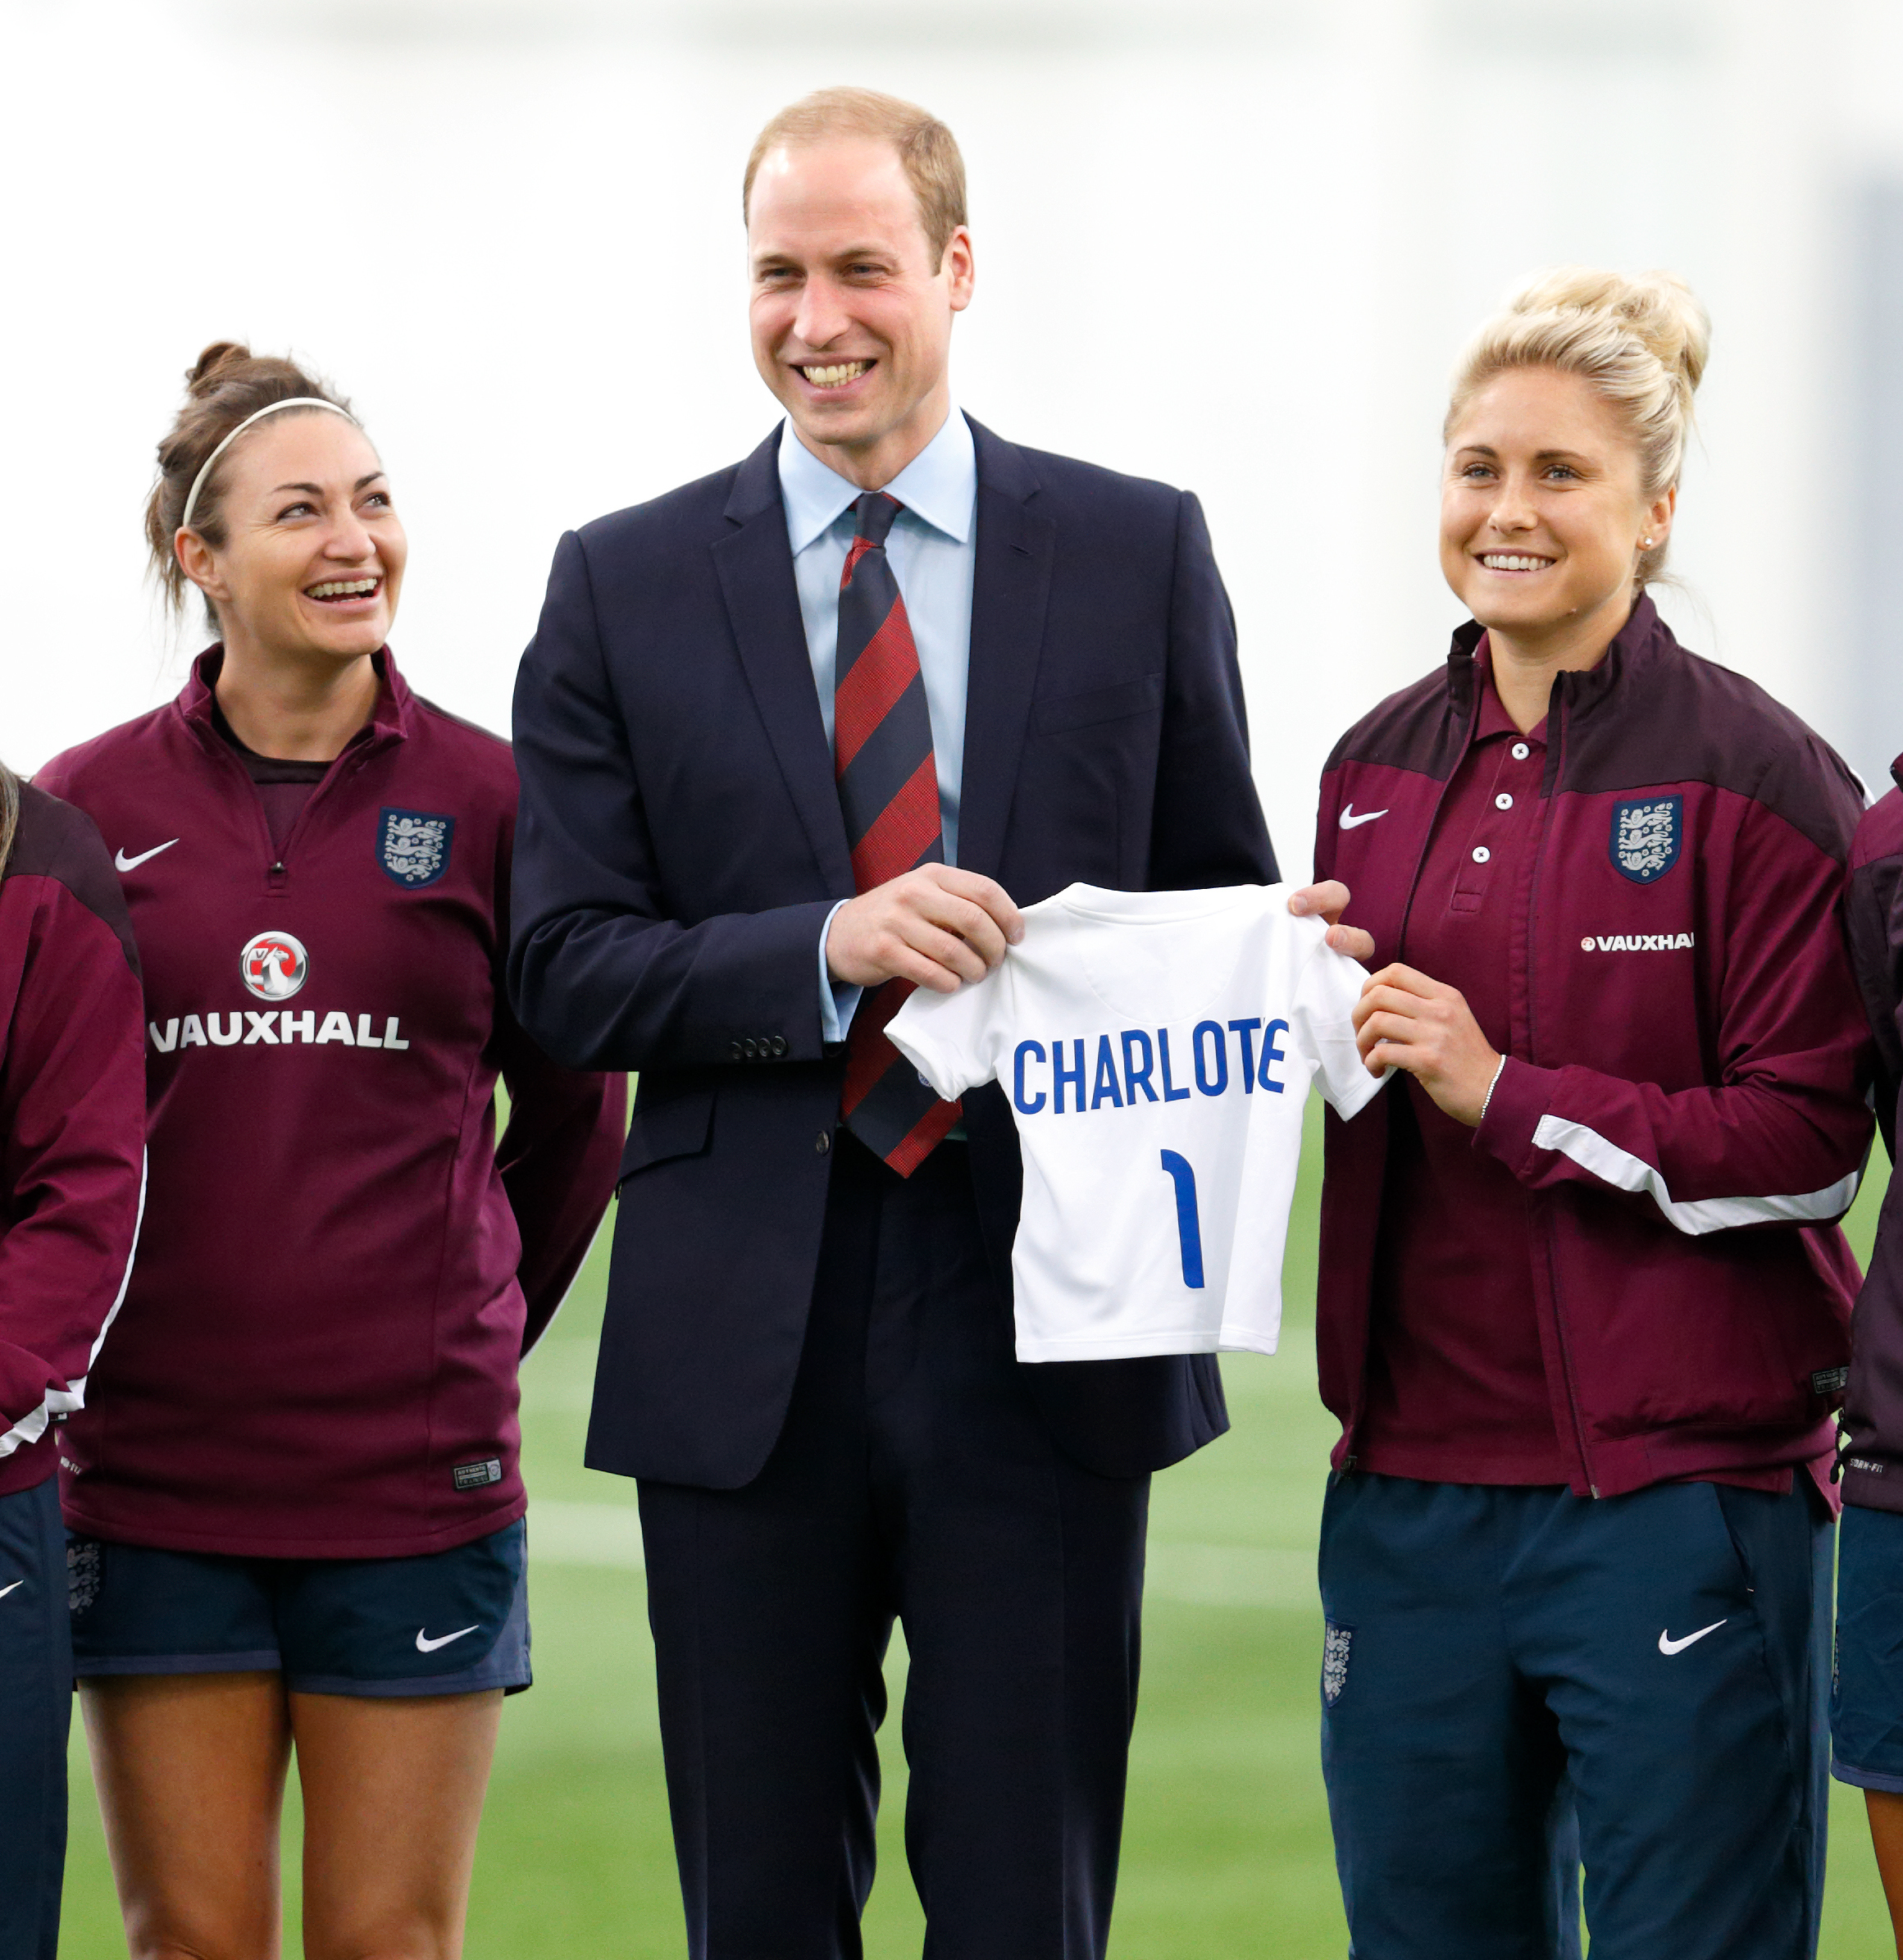 PHOTO: Prince William, Duke of Cambridge receives an England football shirt for daughter Princess Charlotte of Cambridge from Captain Steph Houghton, right, at St George's Par, May 20, 2015 in Burton-upon-Trent, England.